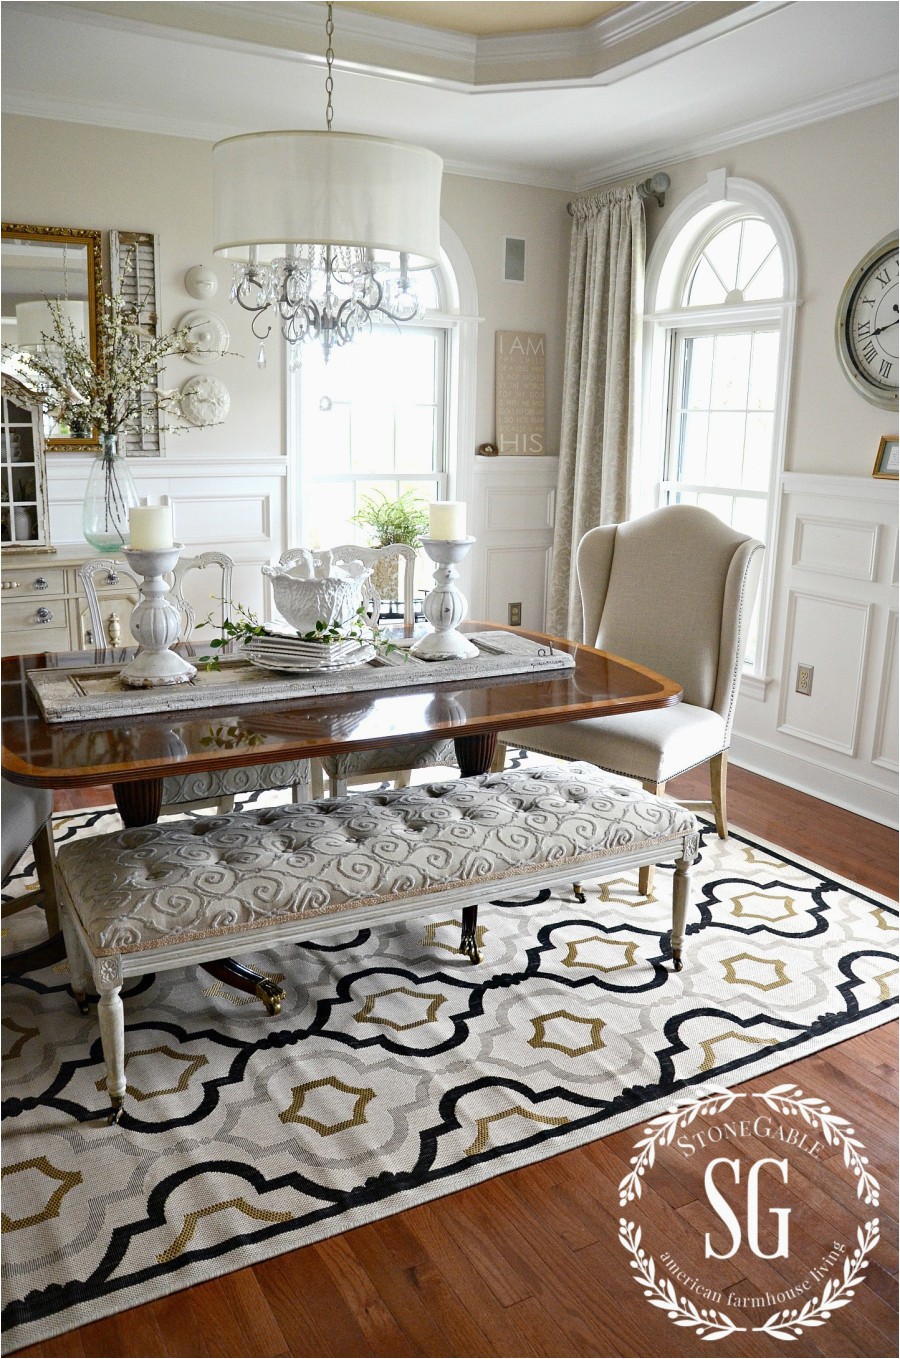 Best Type Of area Rug for Dining Room 5 Rules for Choosing the Perfect Dining Room Rug Stonegable